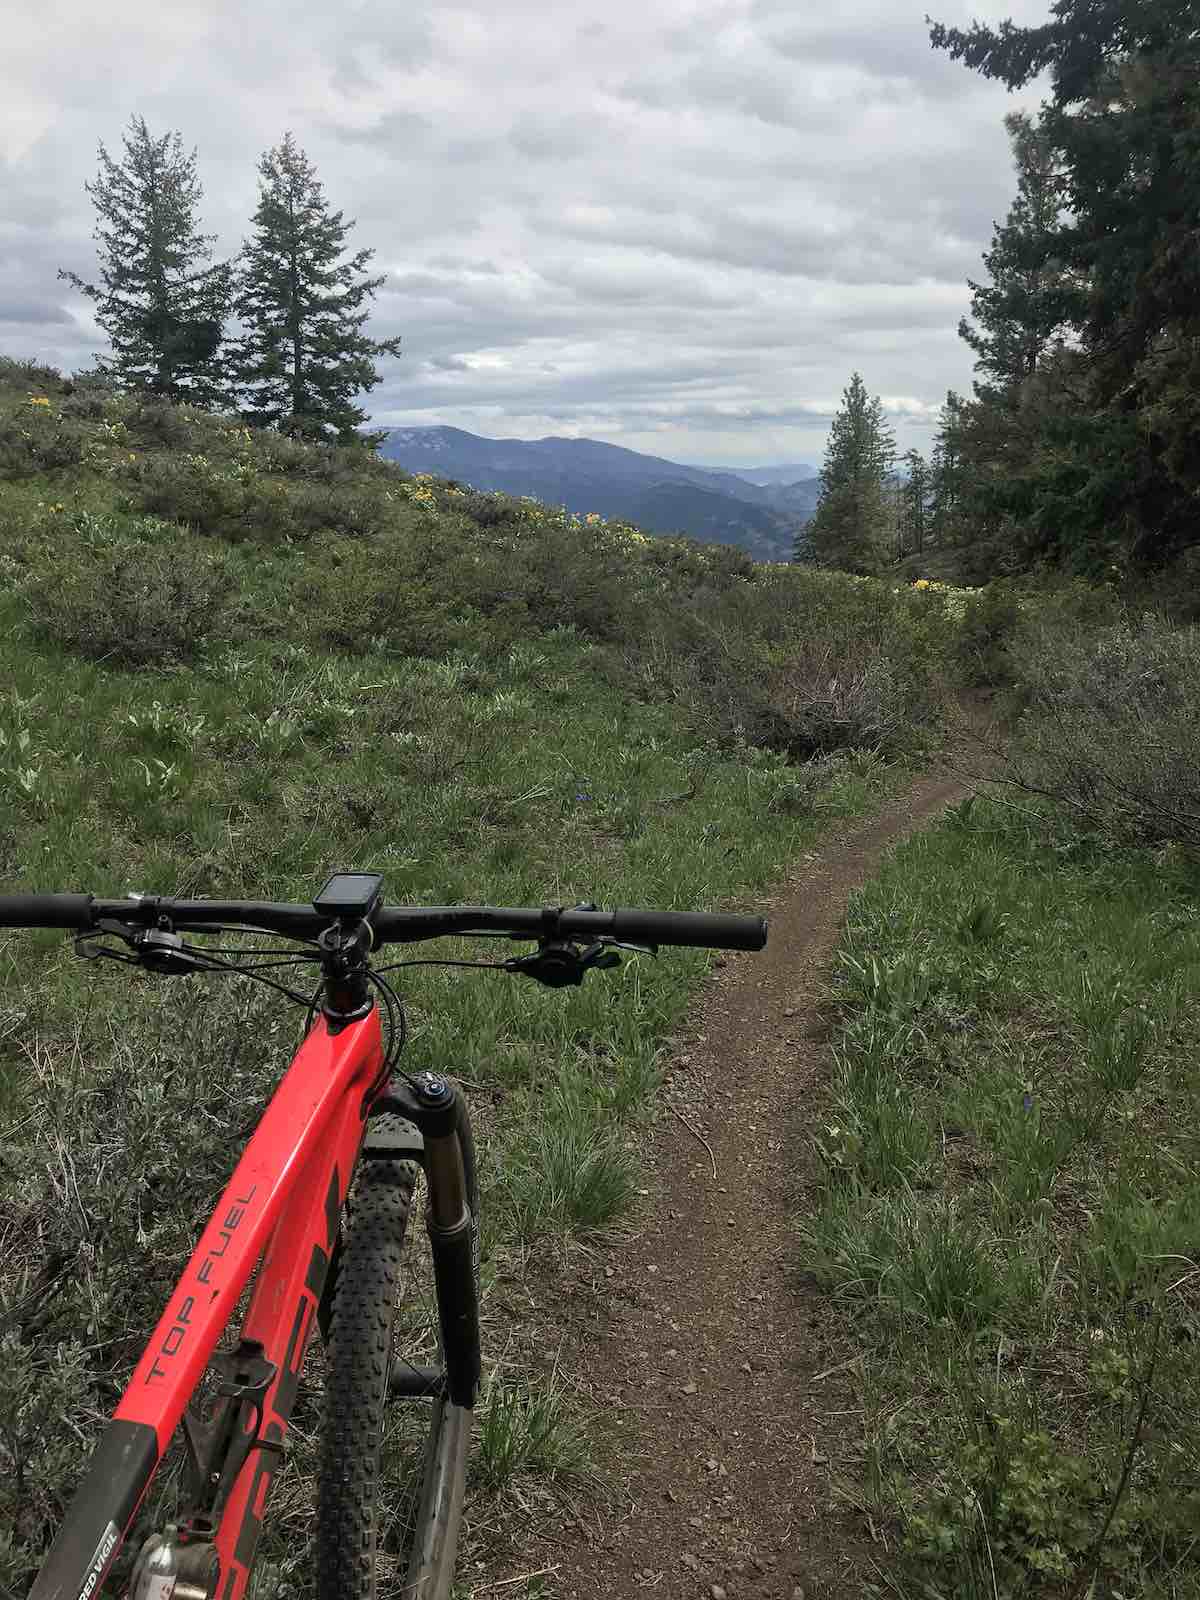 bikerumor pic of the day a red mountain bike is on a dirt trail surrounded by green meadow with pine trees in the distance on Buck Mountain washington state. the sky is covered in clouds but the day is bright.